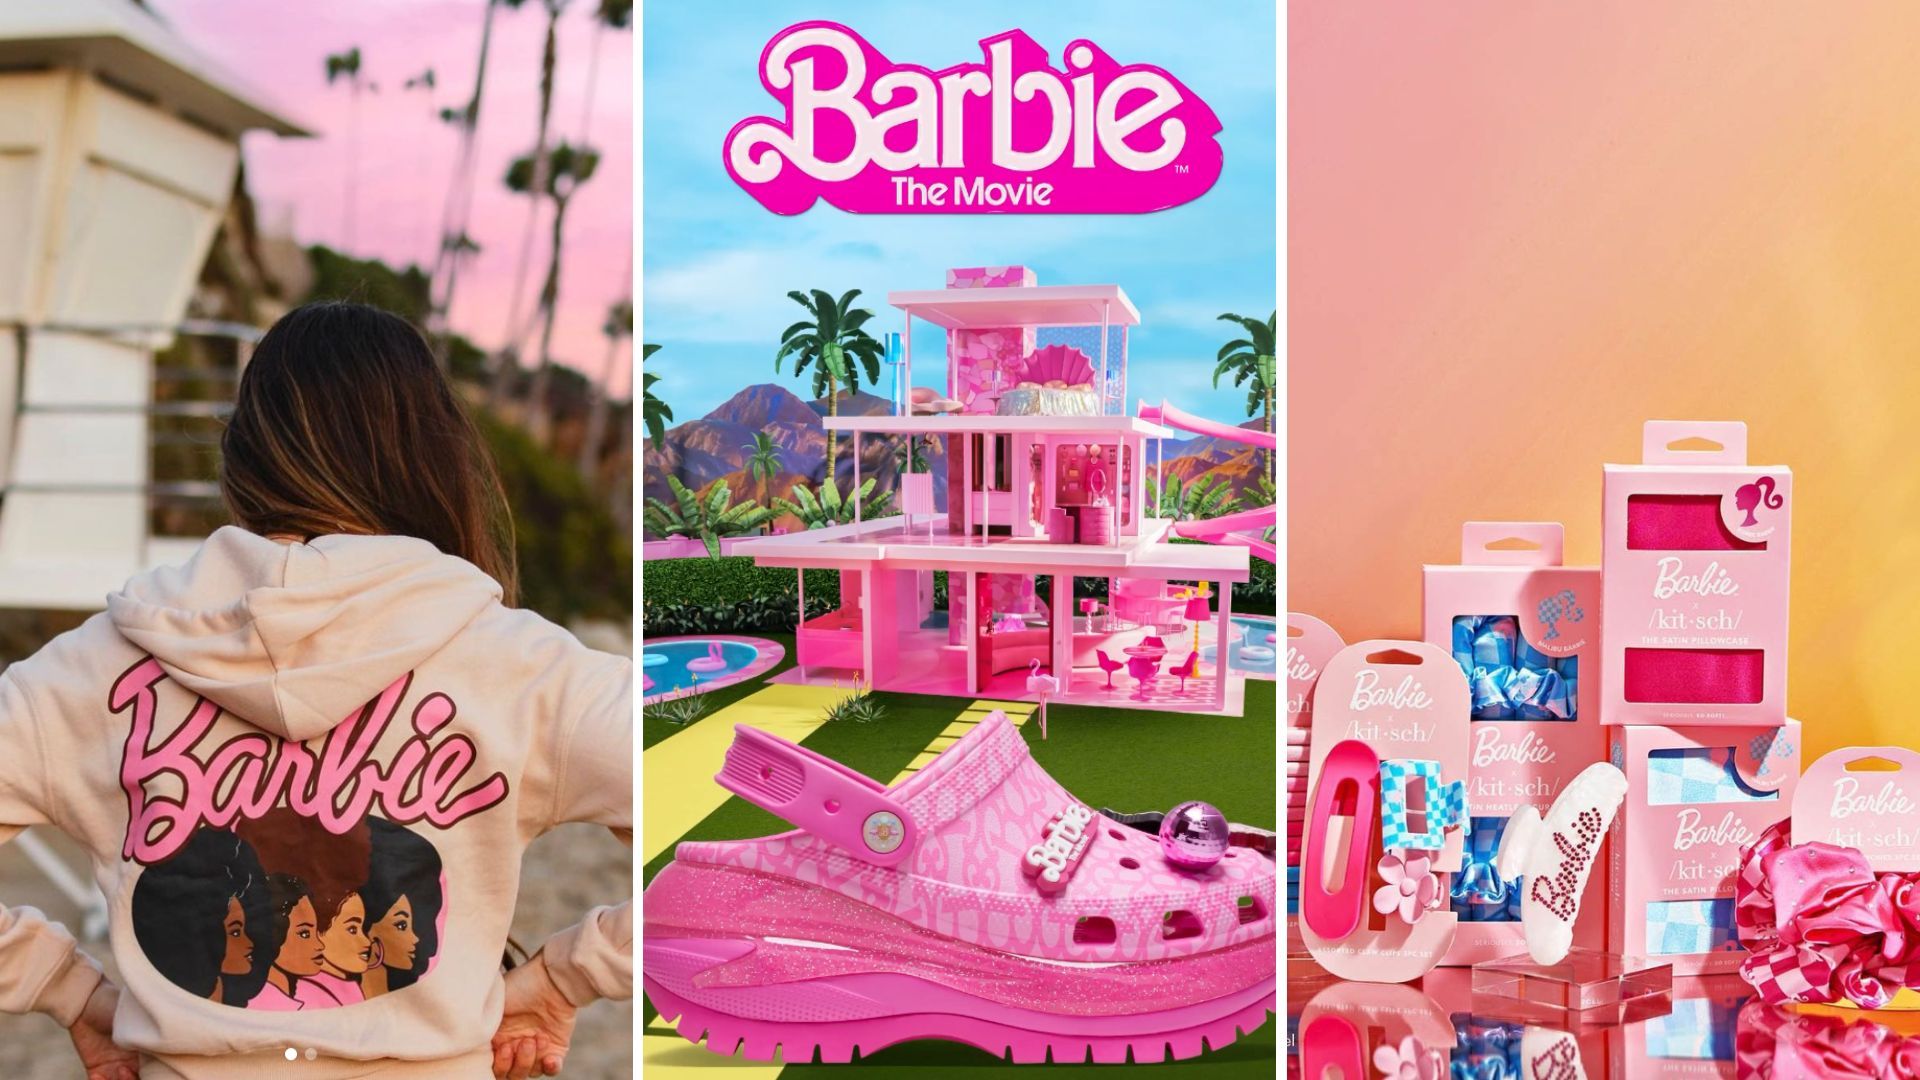 Barbie's Best Fashion Collaborations of All Time